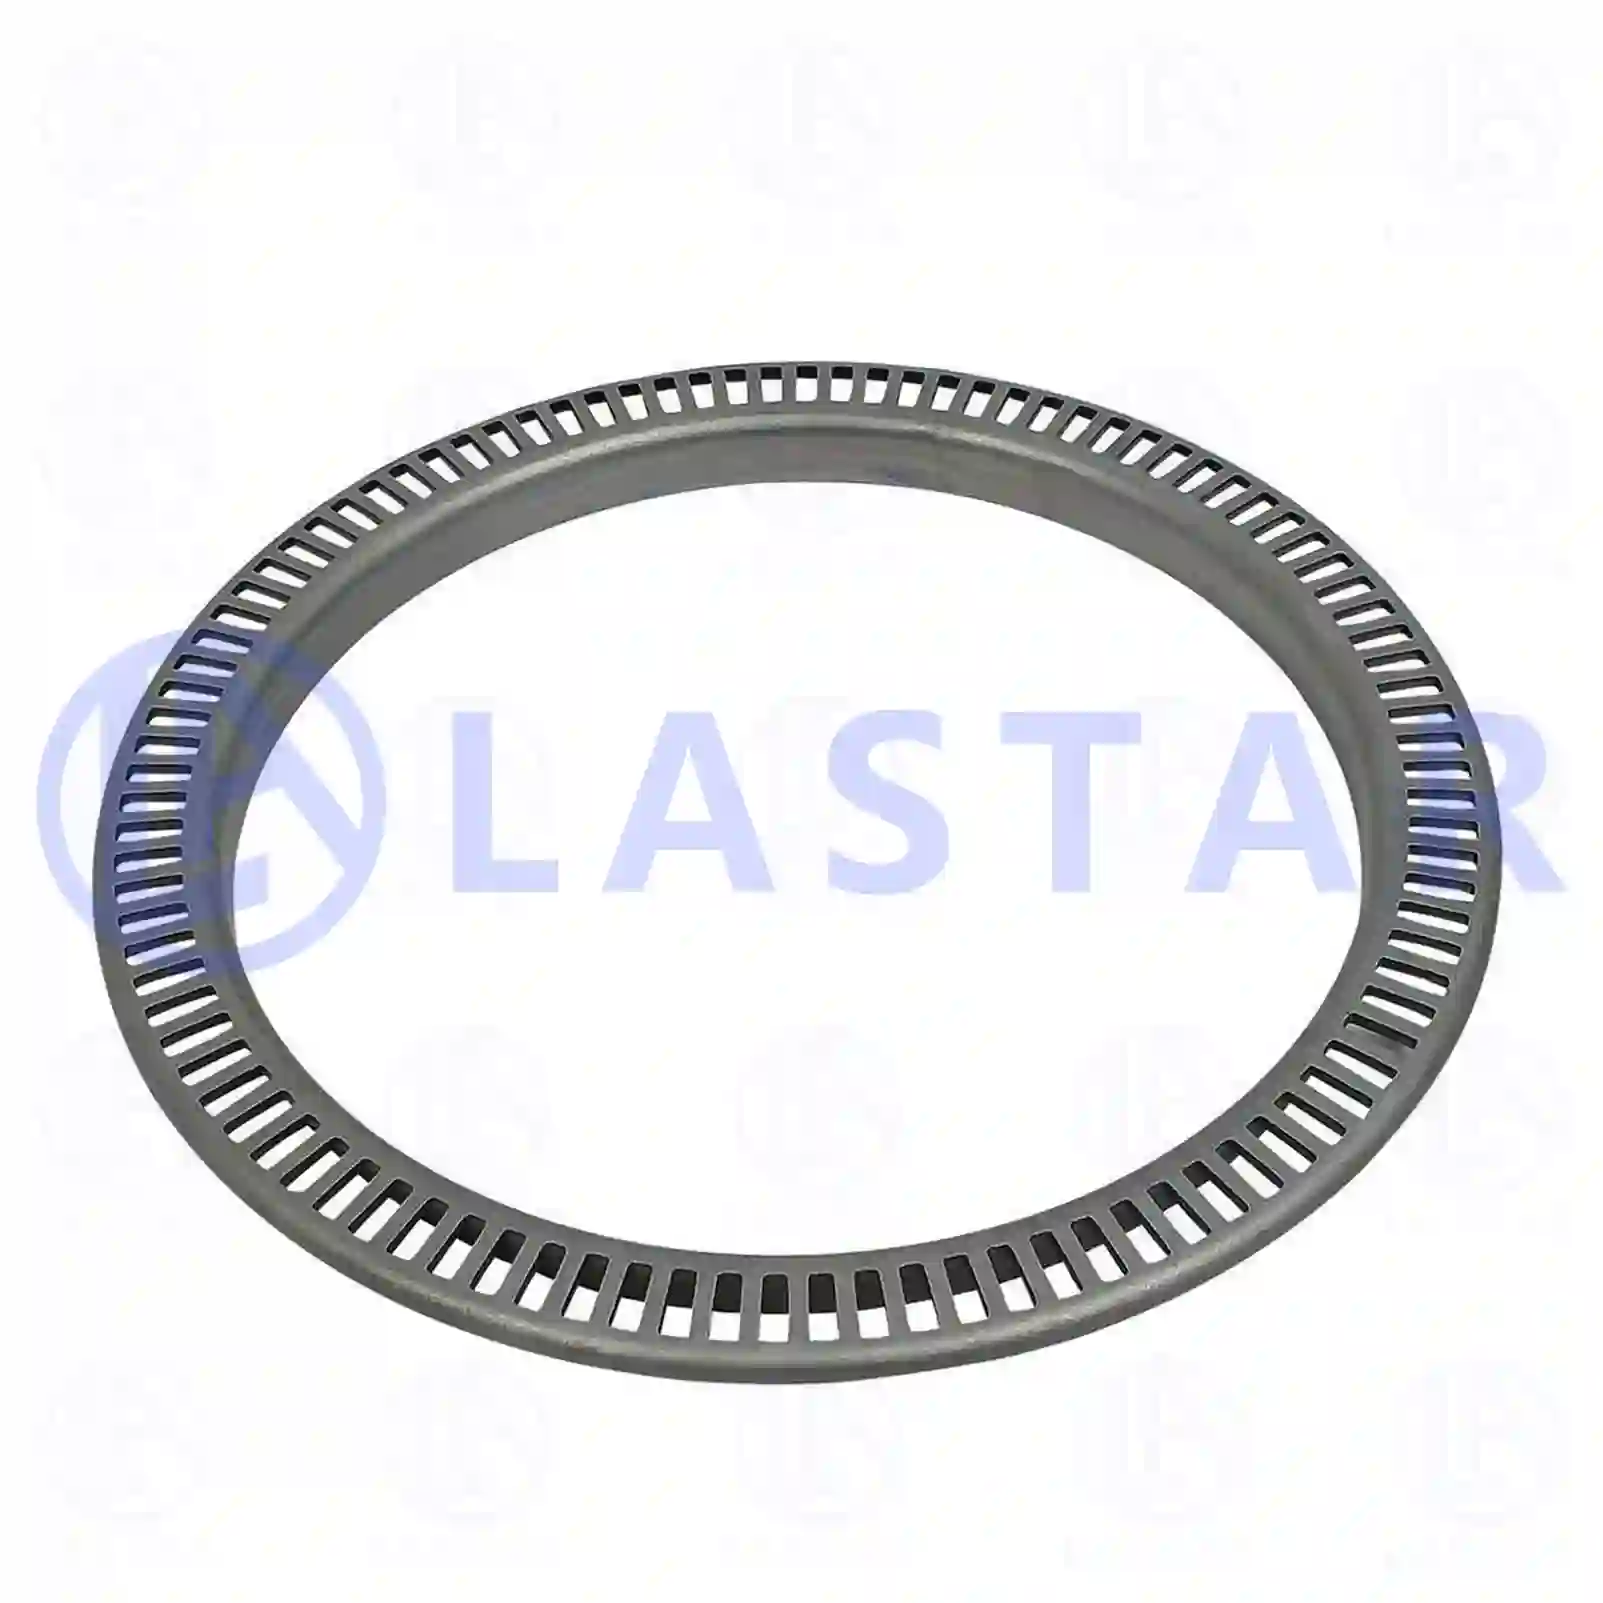 ABS ring, 77726379, 9753340515 ||  77726379 Lastar Spare Part | Truck Spare Parts, Auotomotive Spare Parts ABS ring, 77726379, 9753340515 ||  77726379 Lastar Spare Part | Truck Spare Parts, Auotomotive Spare Parts